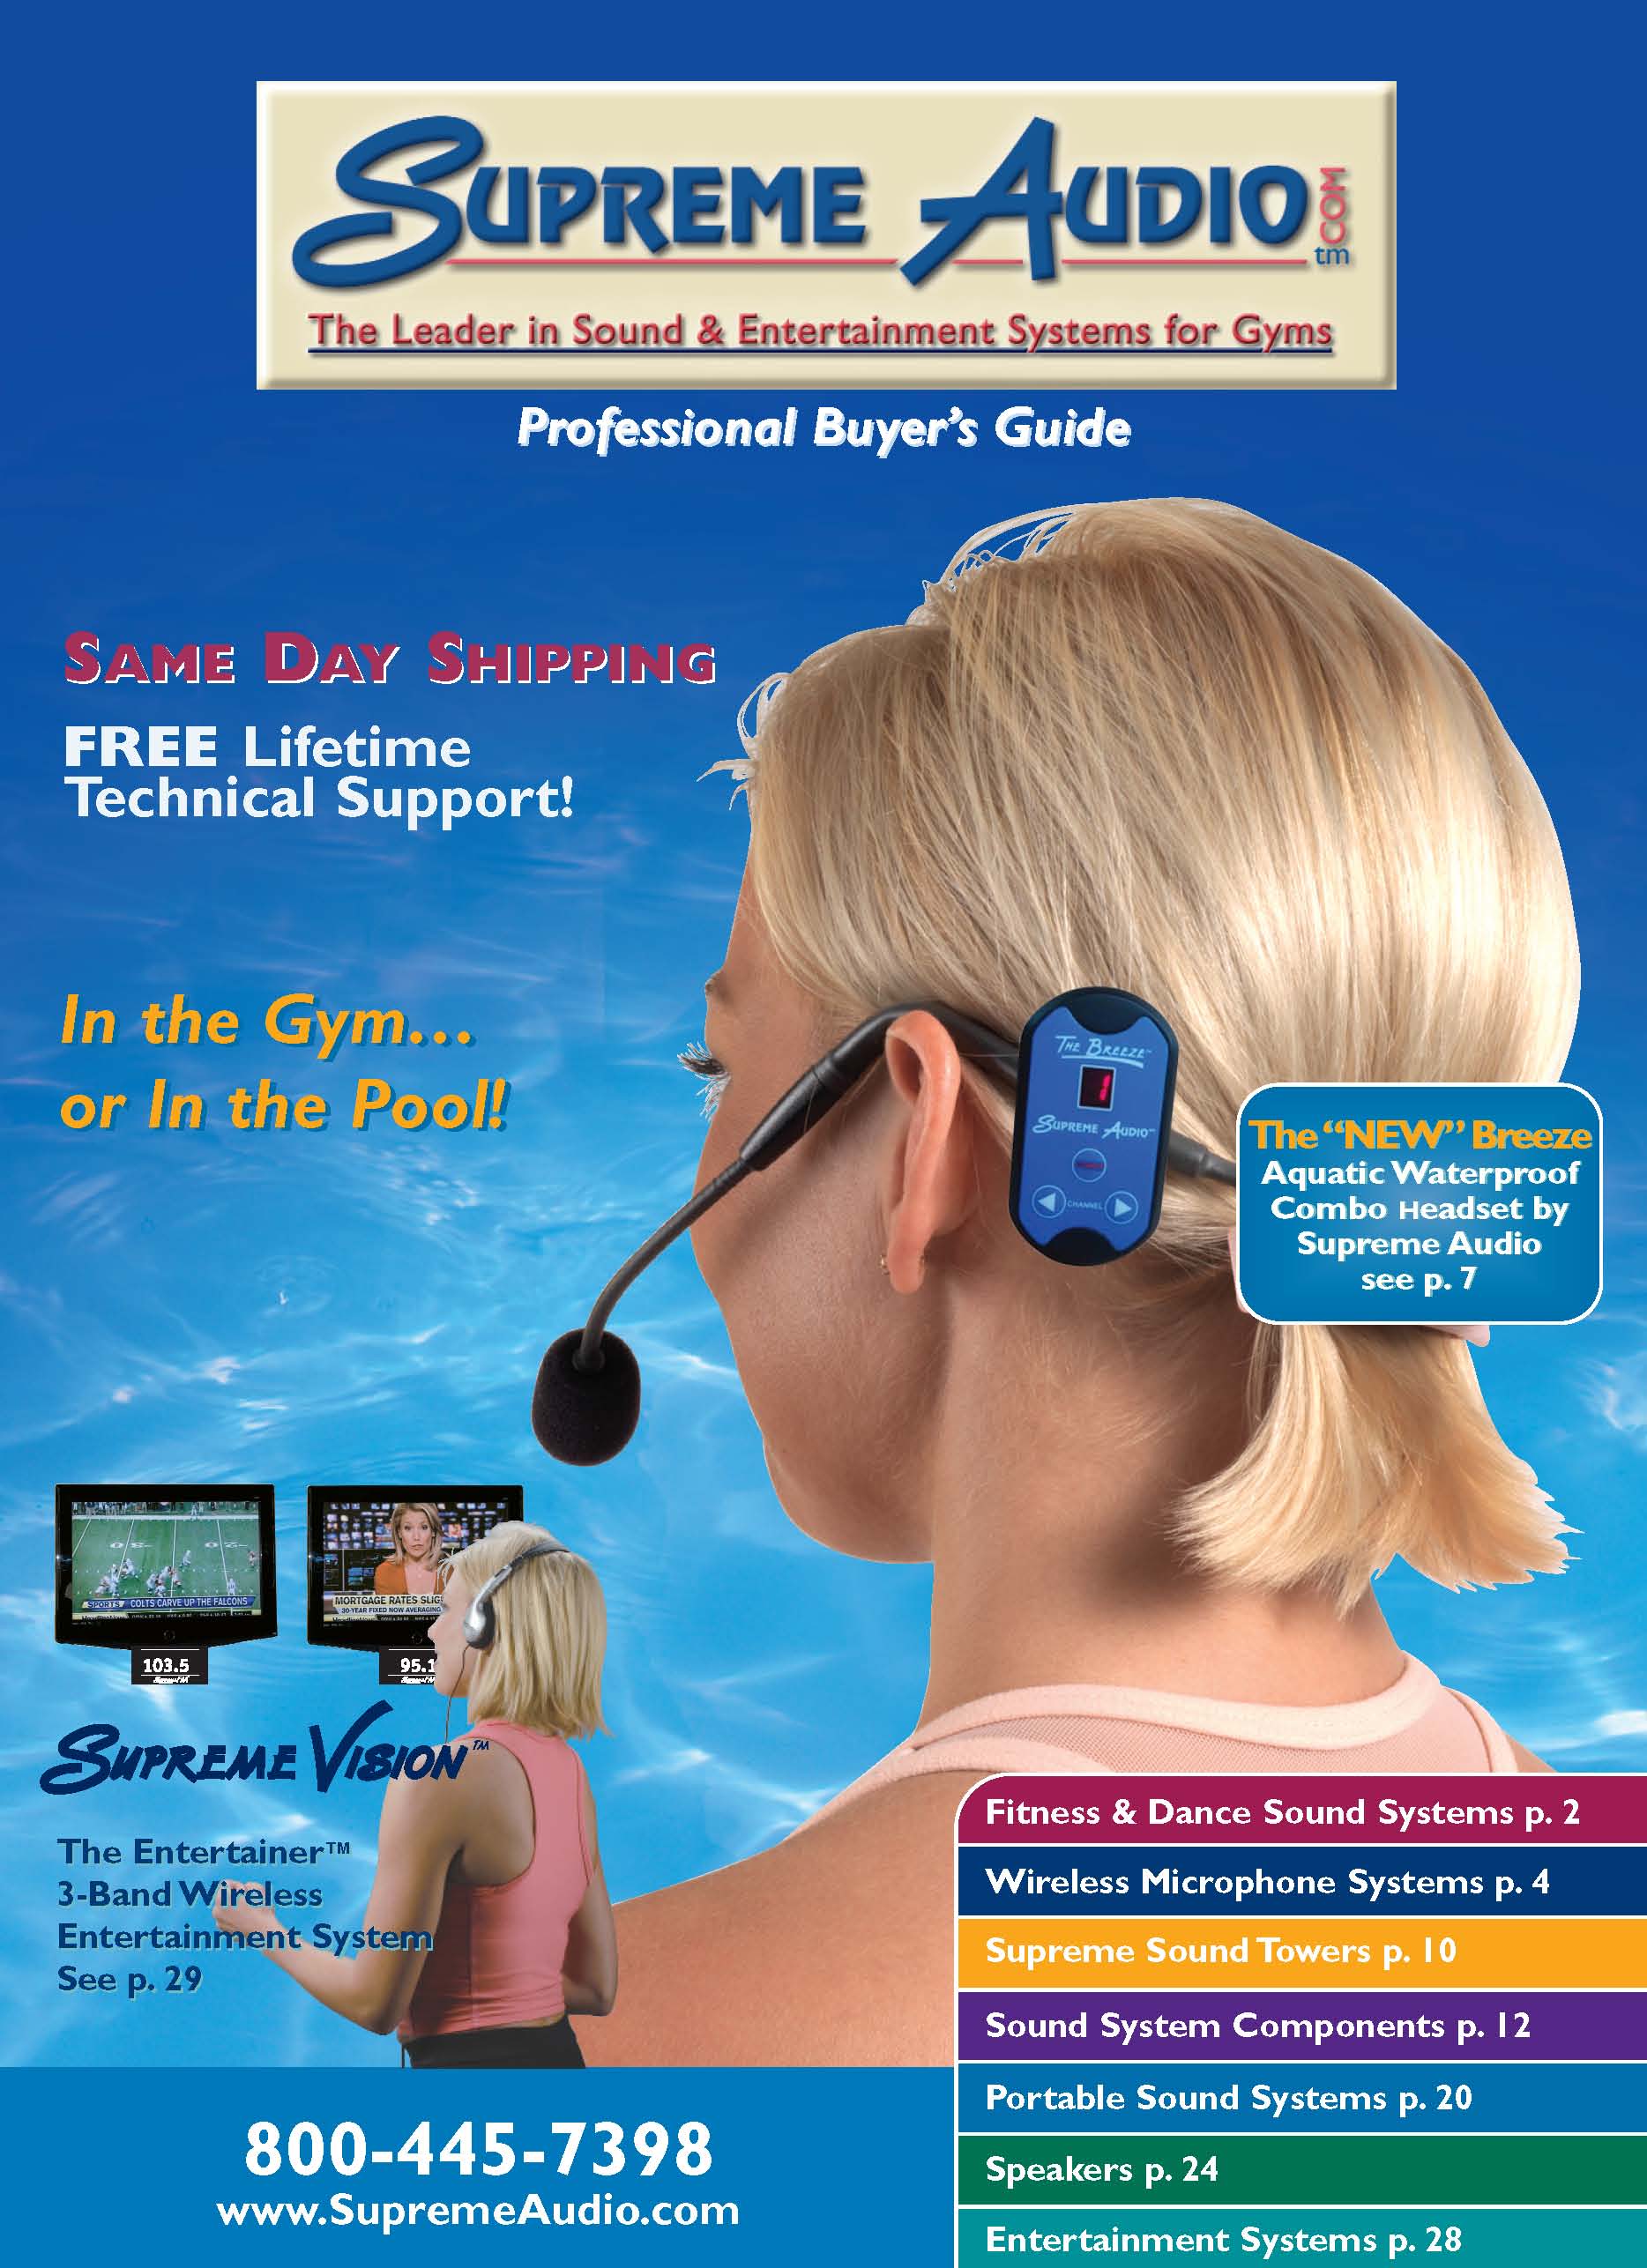 Download Our COMPLETE Online Buyer's Guide!